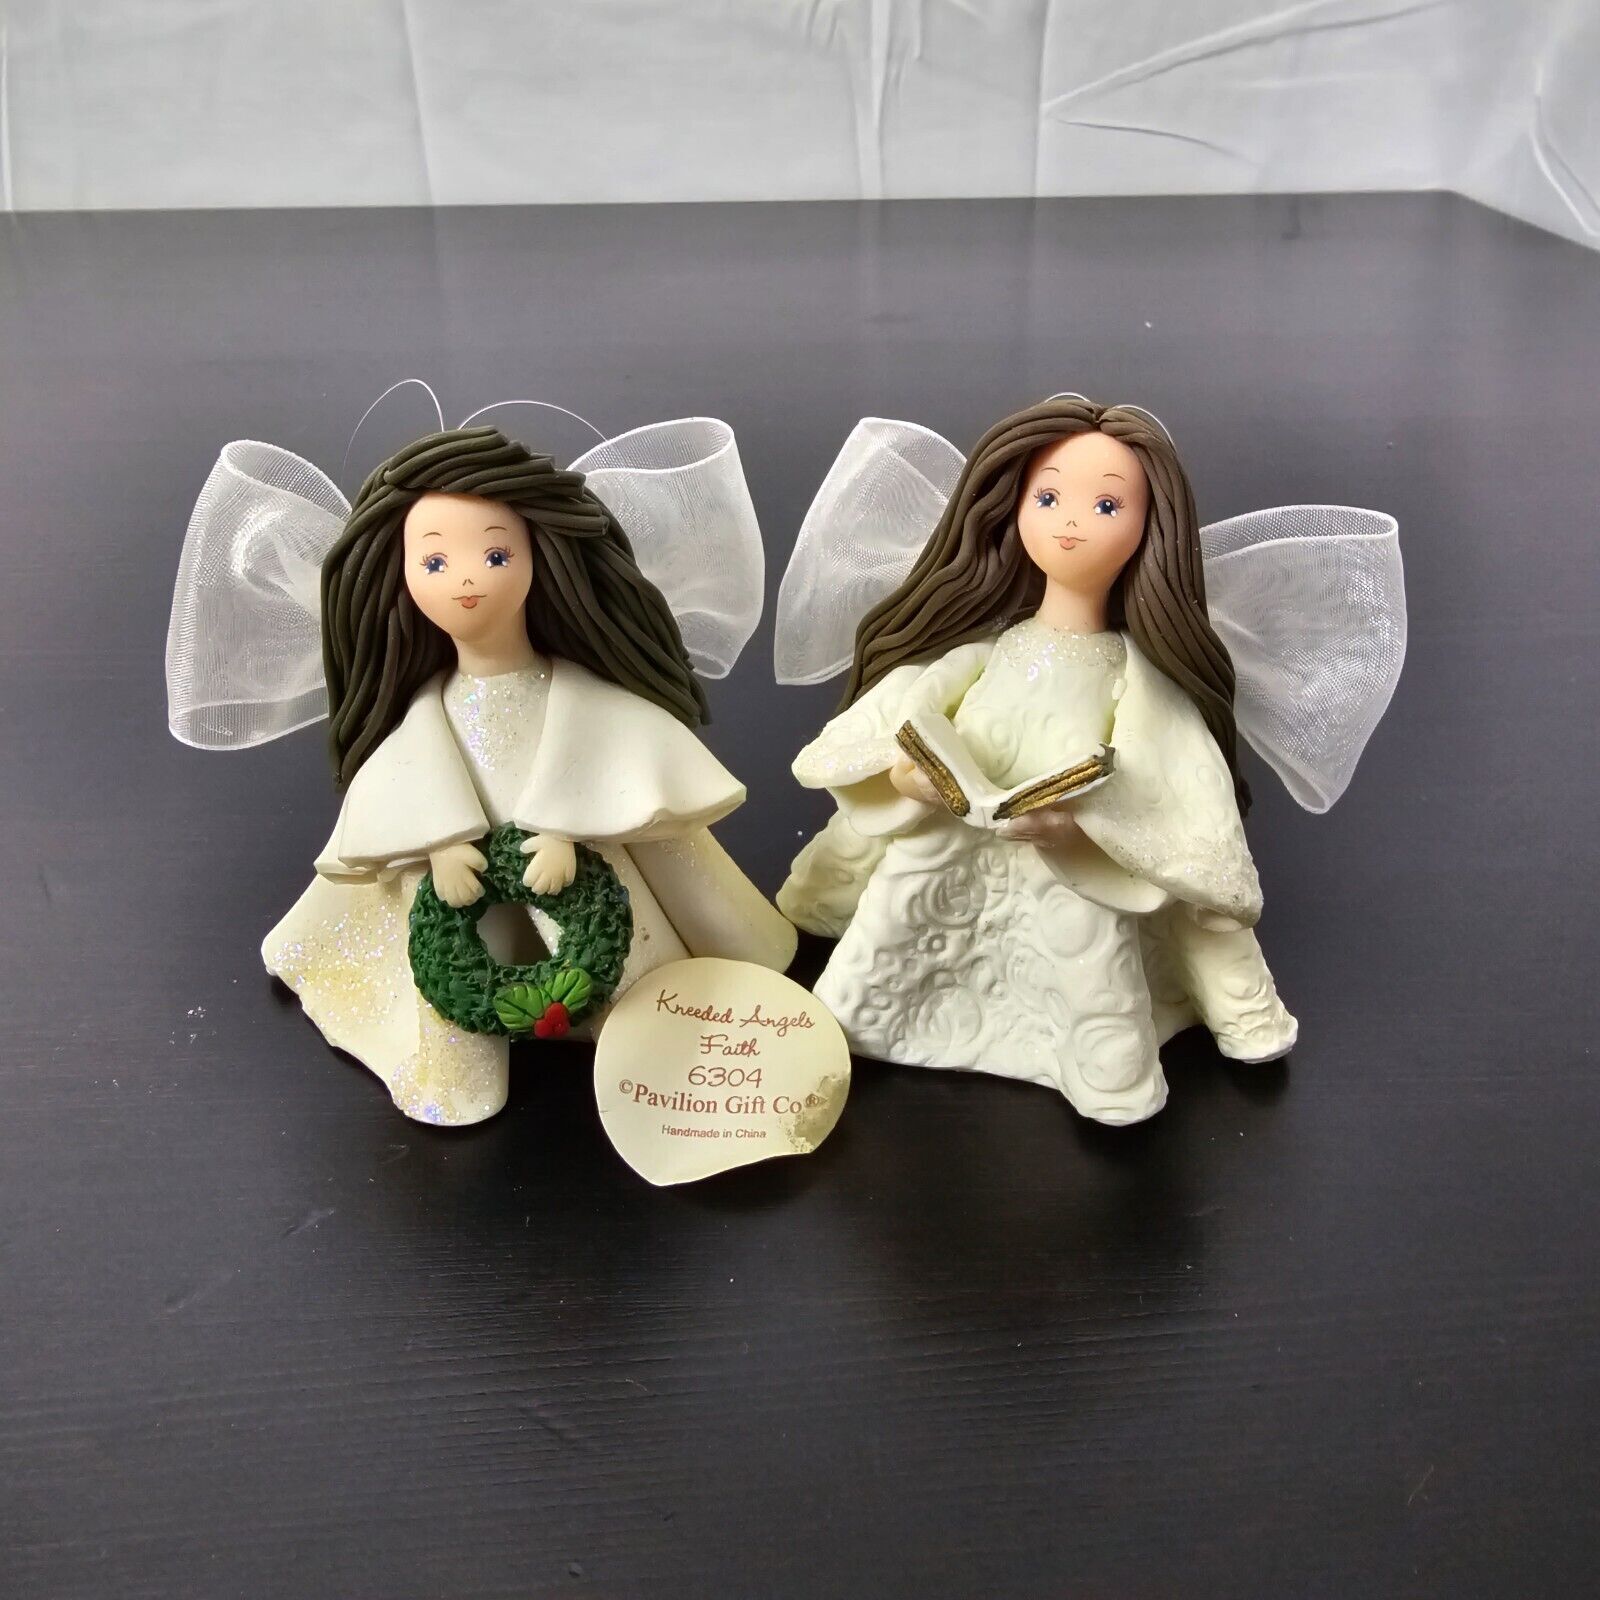 Avon Angel Of Life Kneeded Angels Christmas Ornament Carol A. Graziano Set of 2